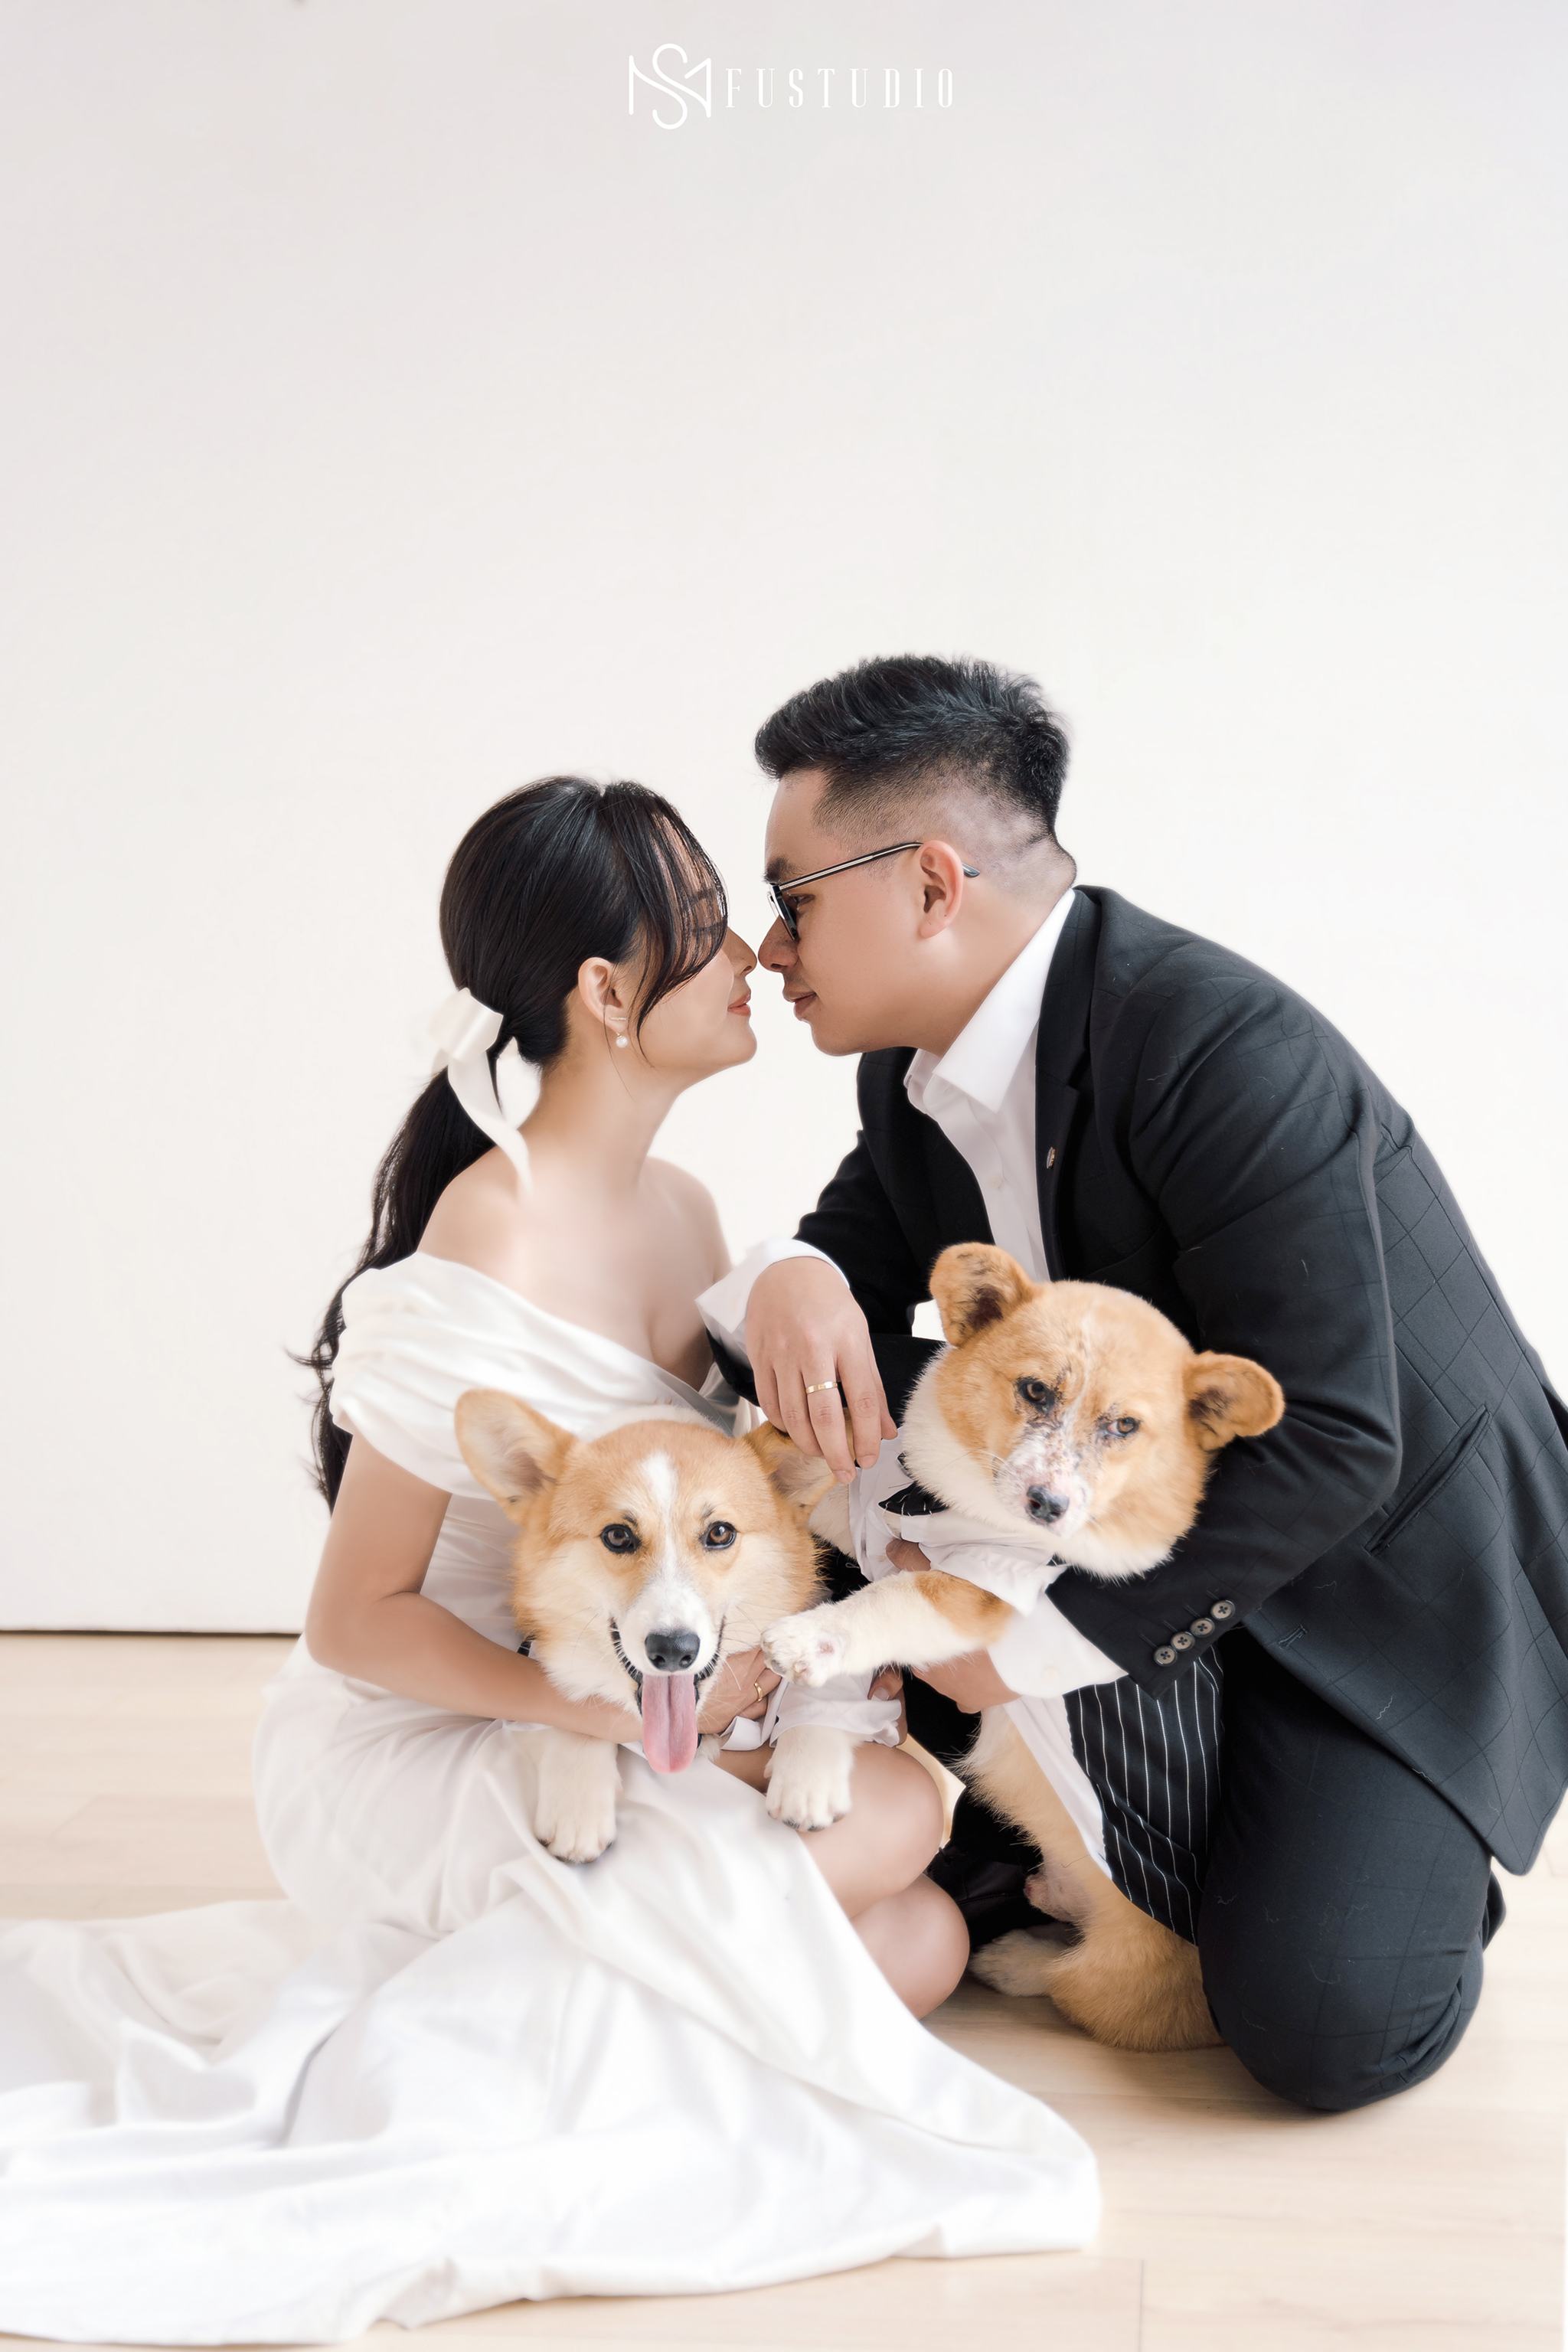 Letting the dog take a wedding photo together, the couple made netizens 